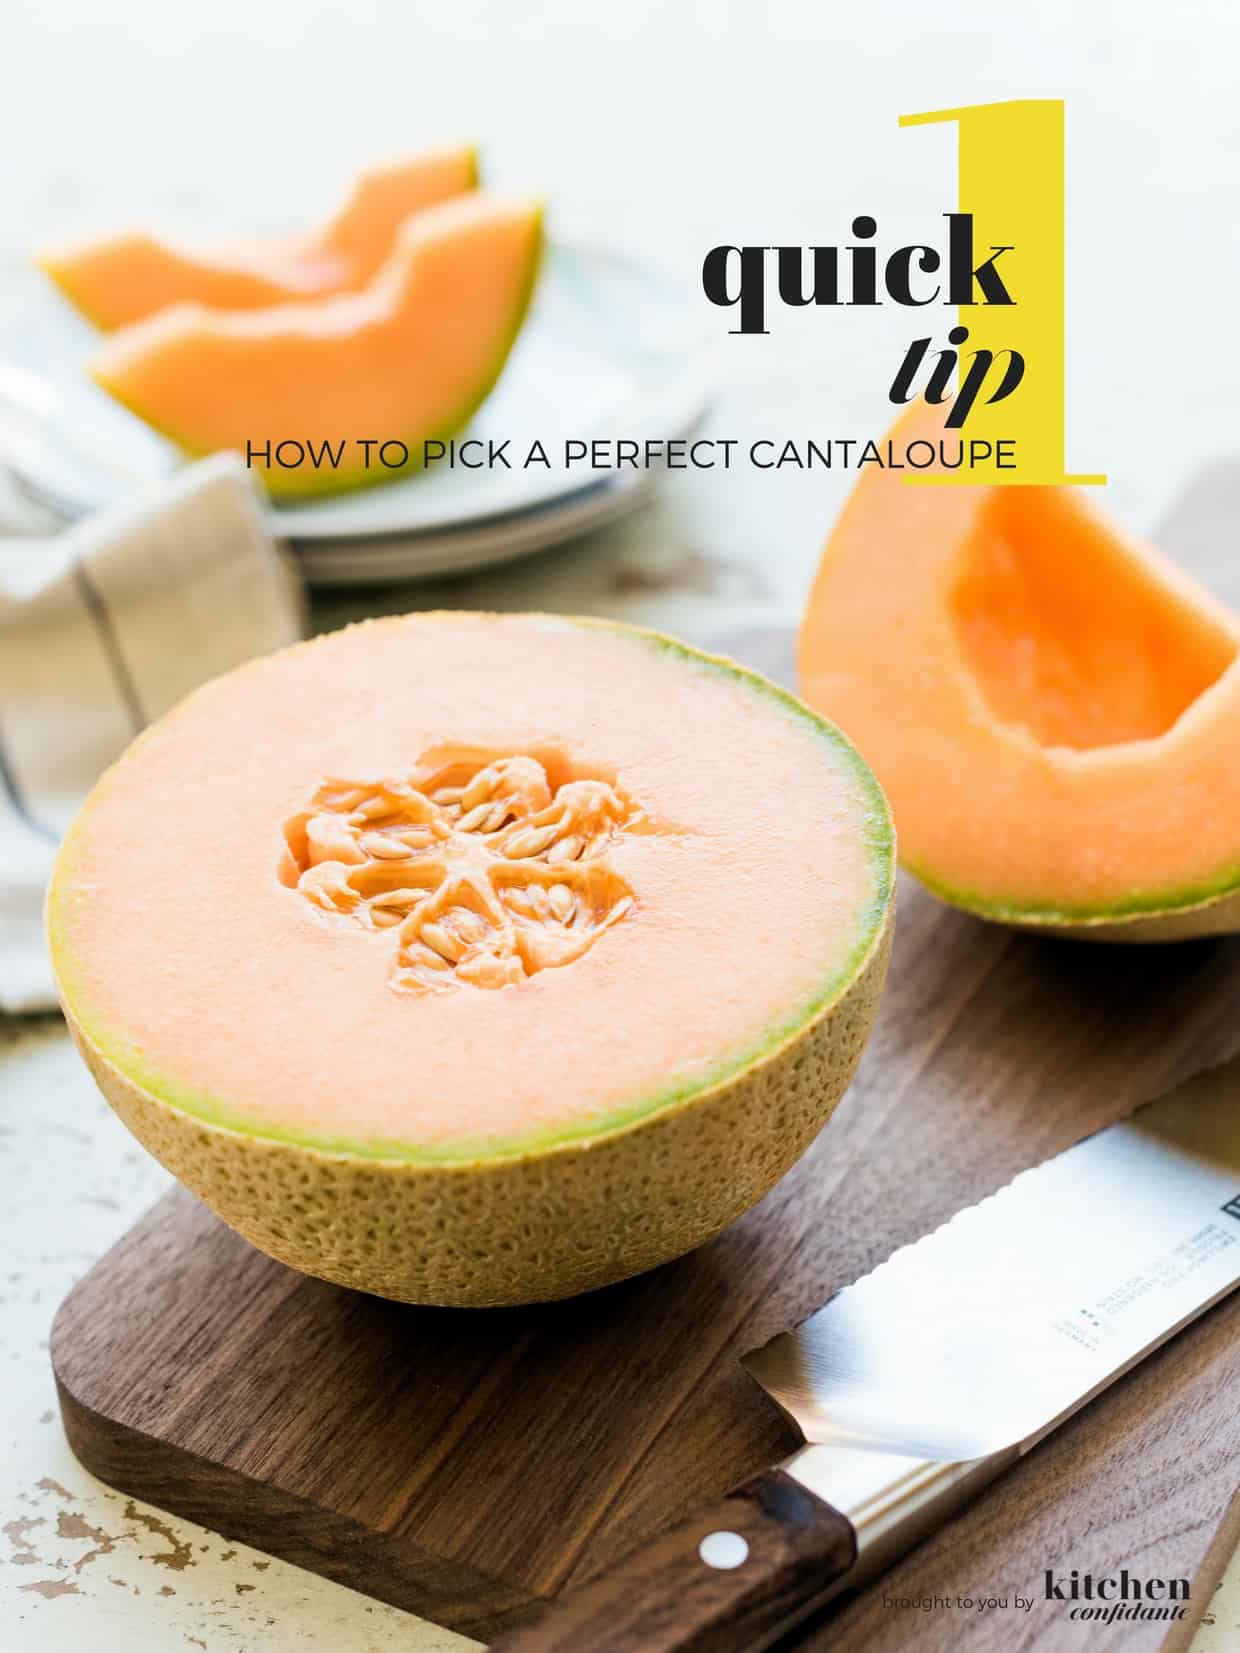 How to pick a cantaloupe - Image of a cantaloupe split in half on a wooden cutting board with slices on a stack of white plates.